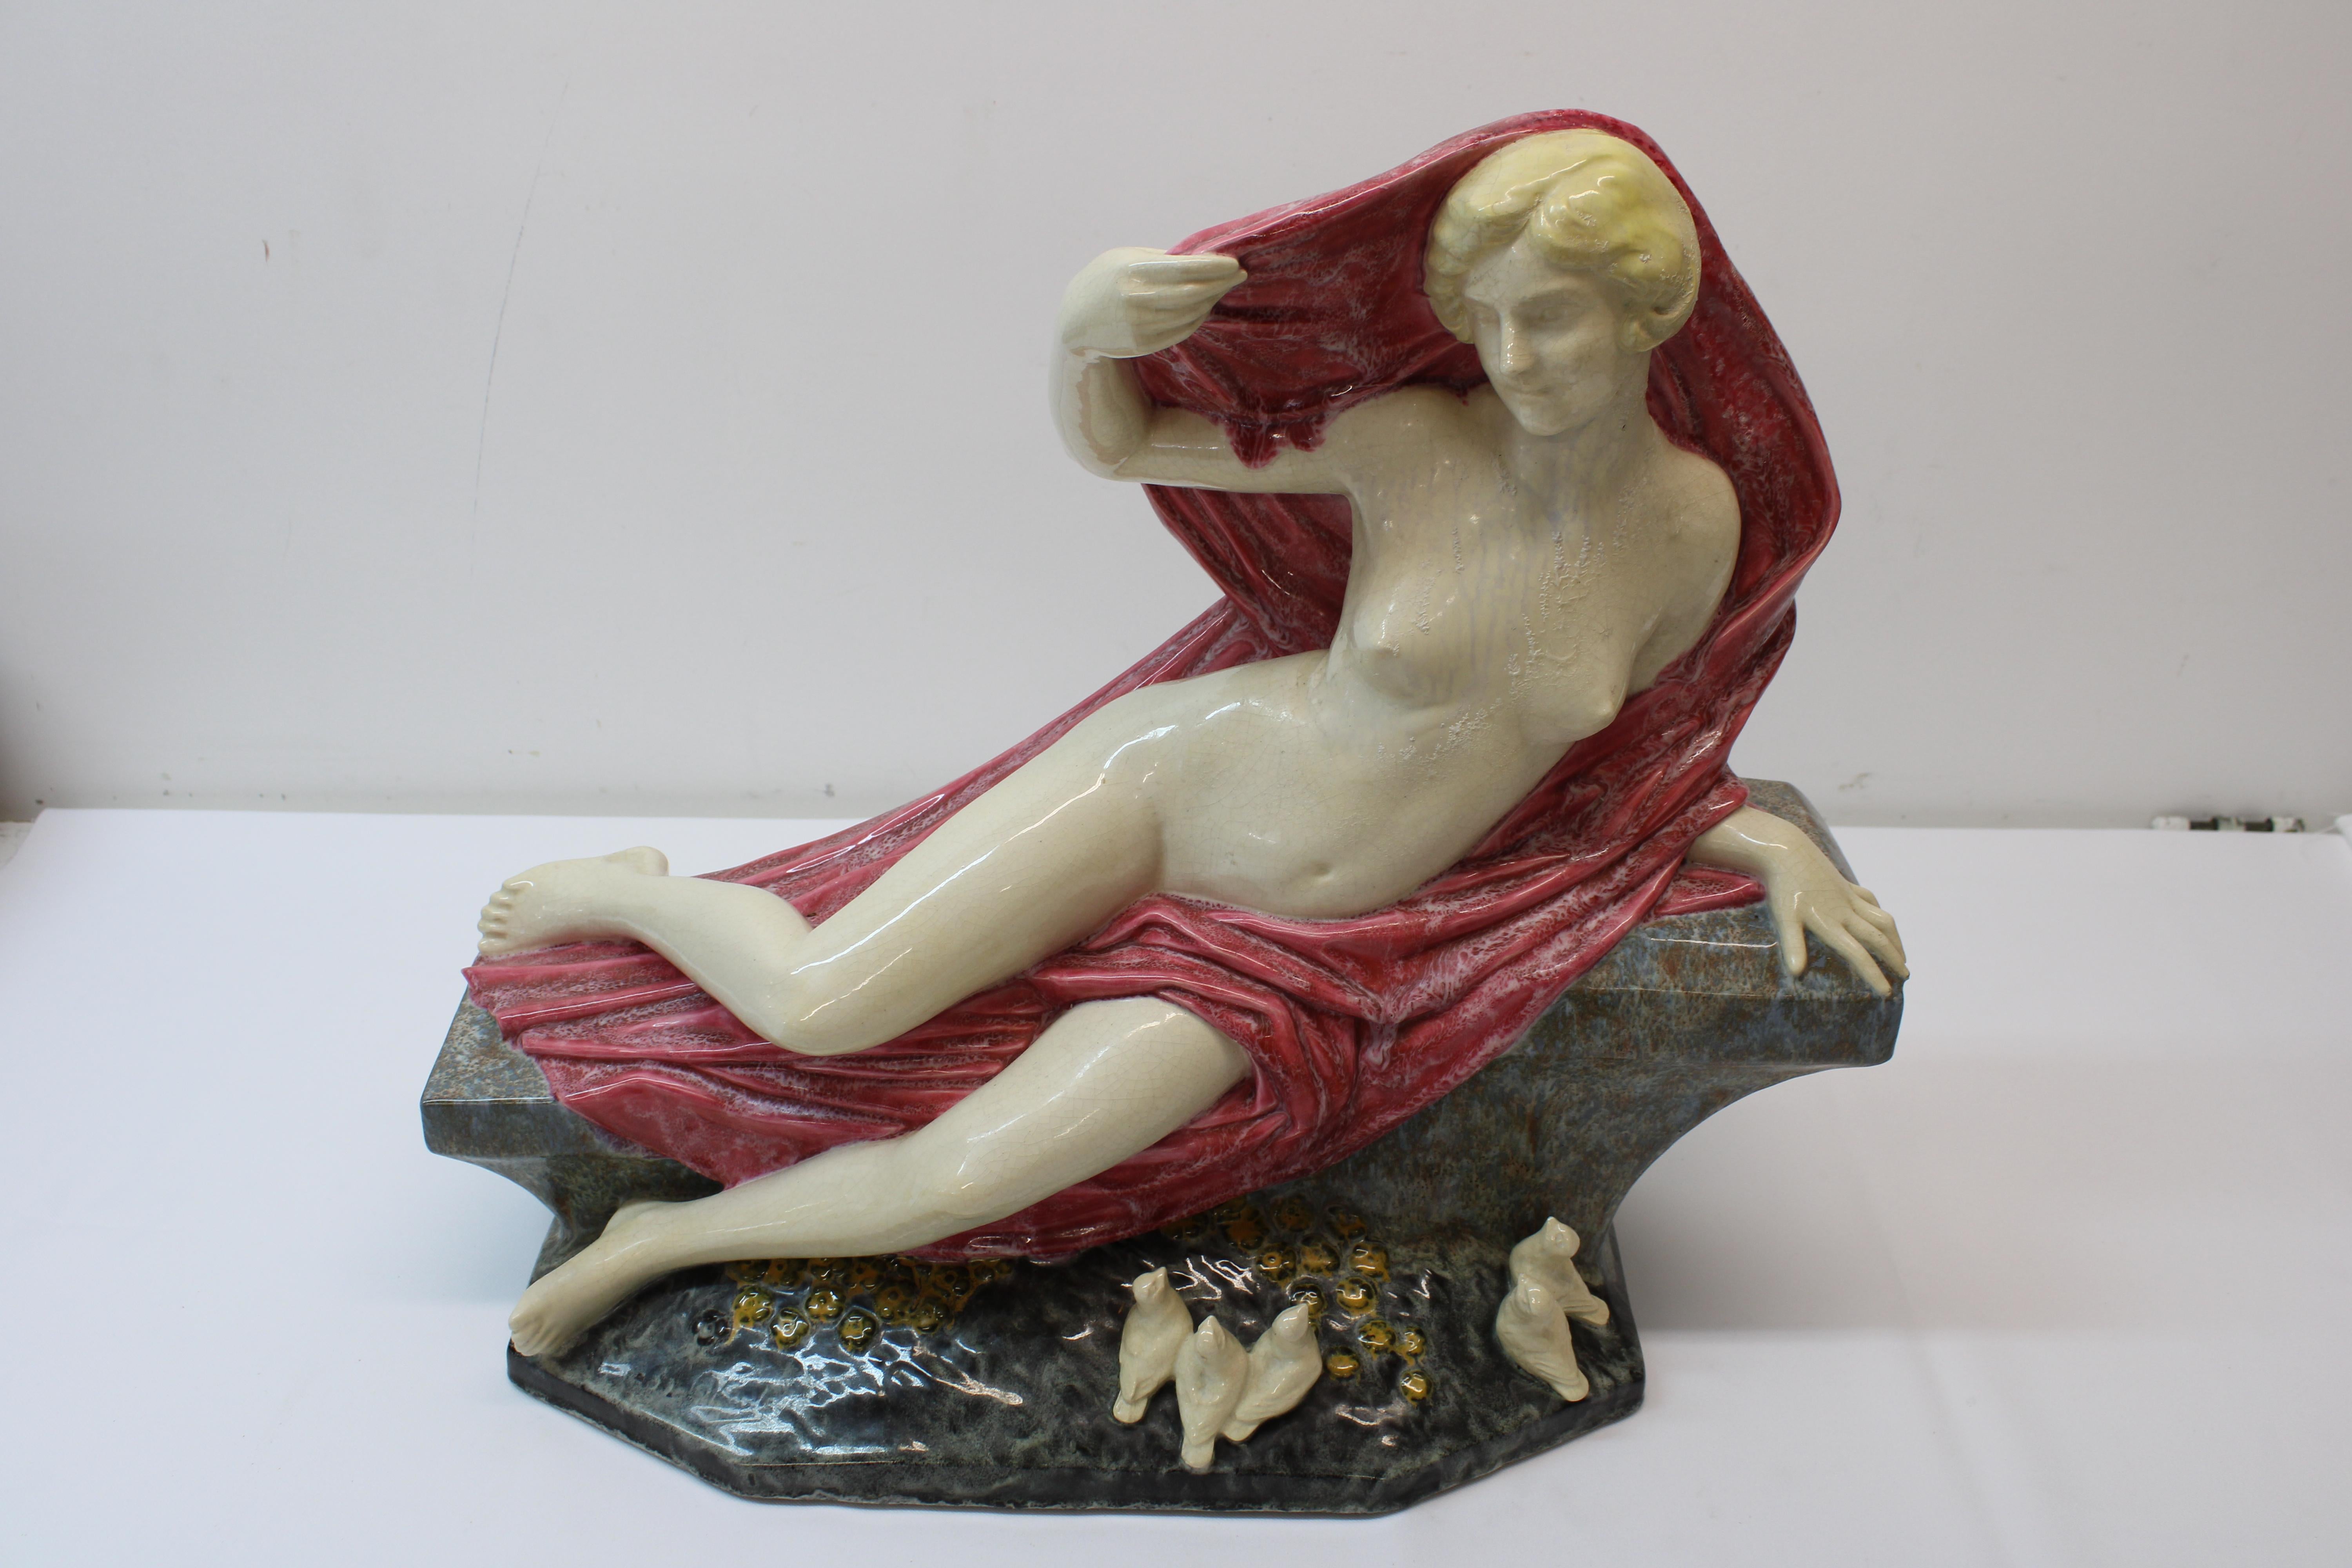 This Magnificent Female nude sculpture holds no bounds, Calmly sitting with birds while slightly covering herself she is a true beauty. Done in the 1930's she sits quietly & serene waiting to be displayed in any household.